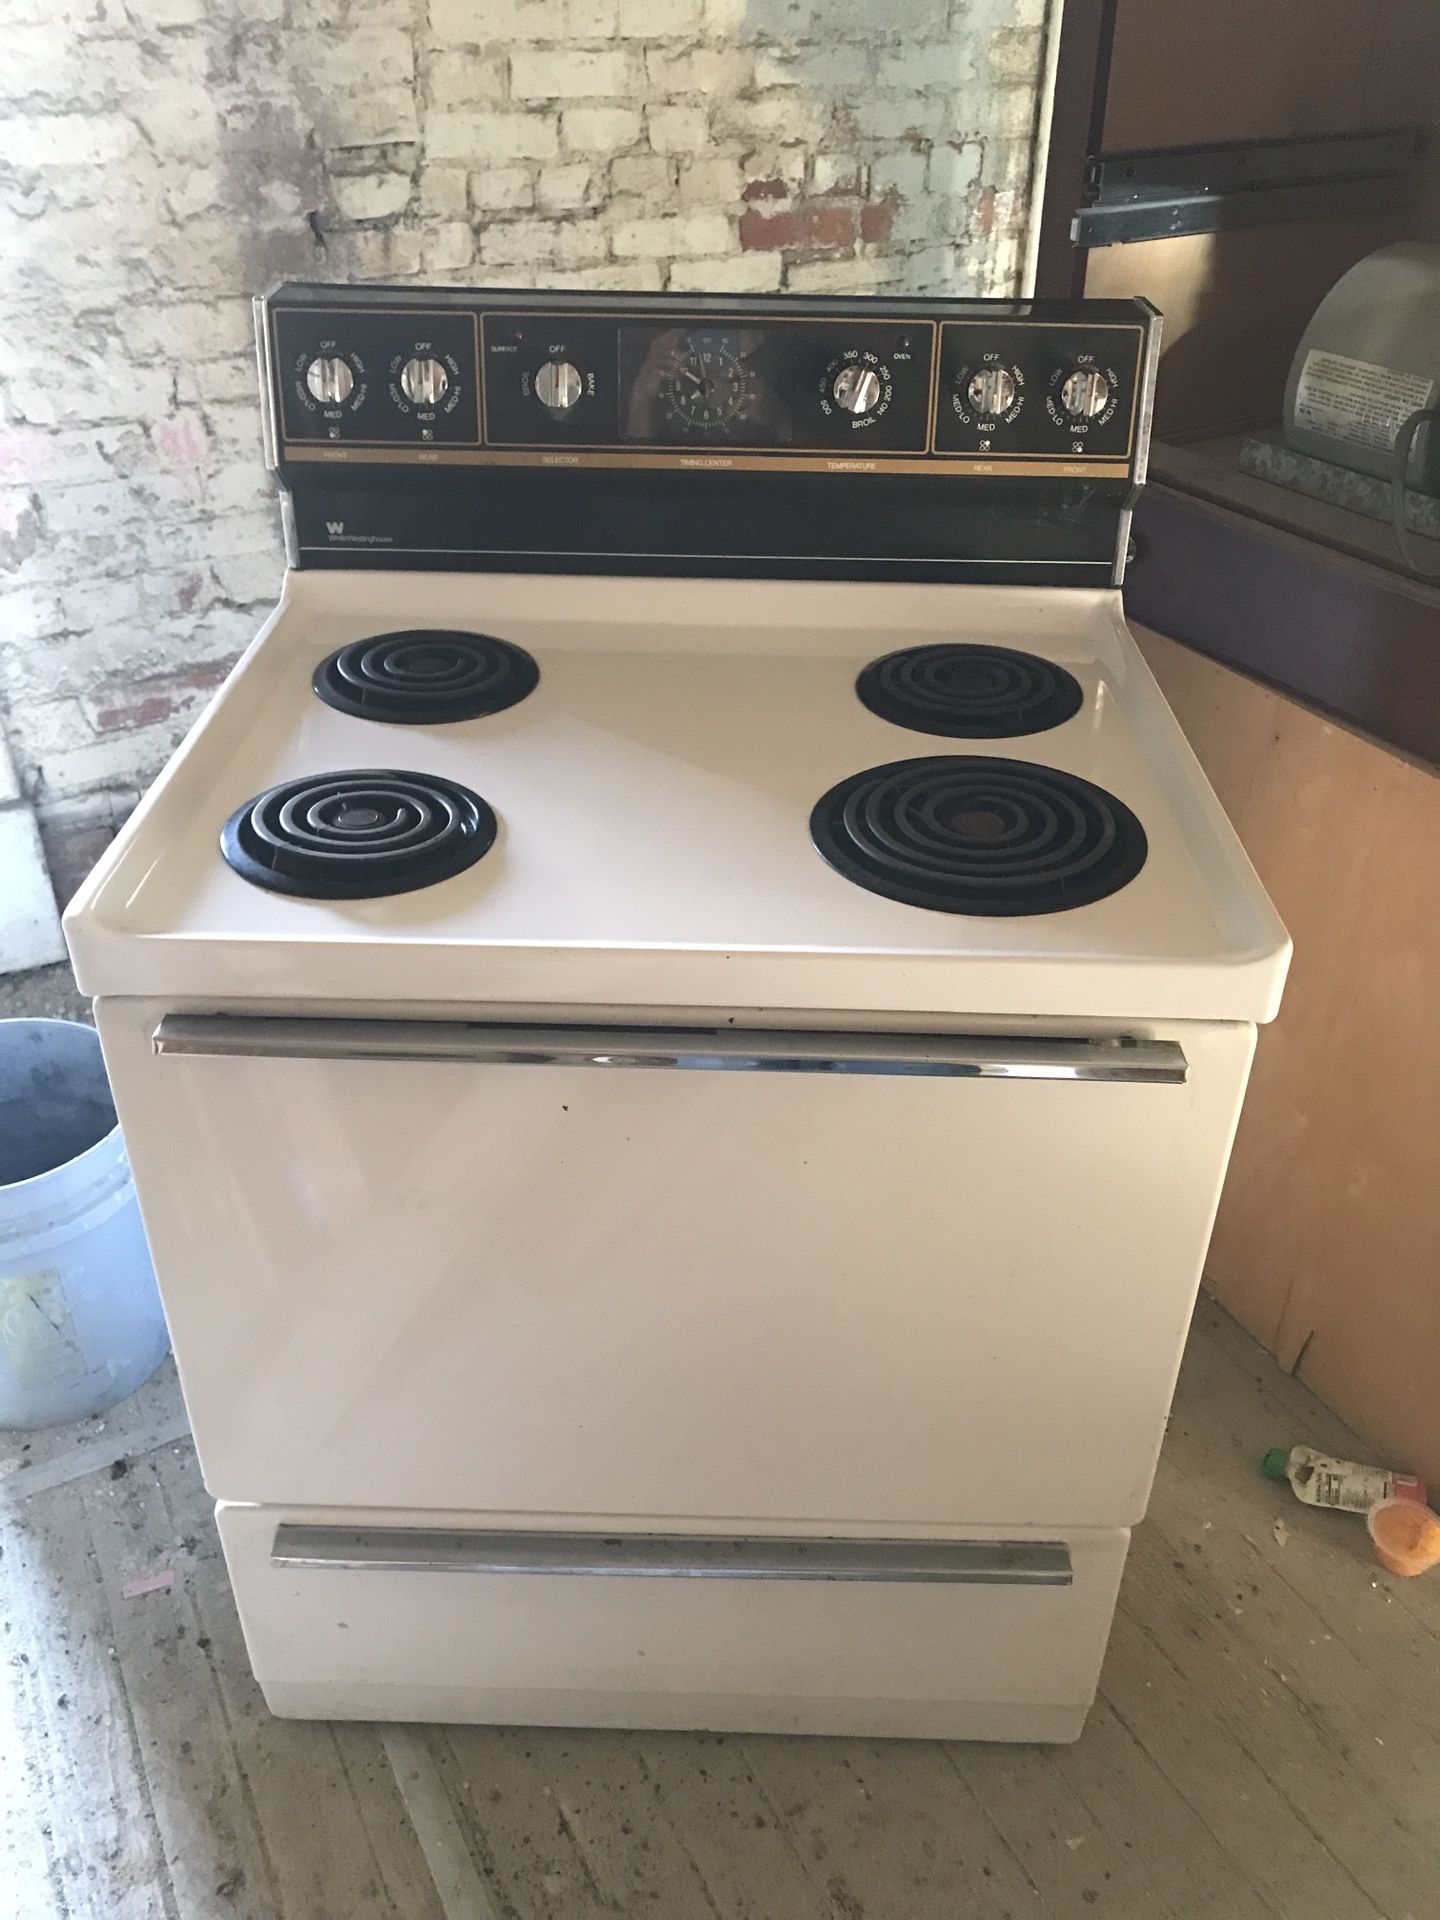 Zojirushi EP-RAC50 Electric Skillet for Sale in Plain City, OH - OfferUp